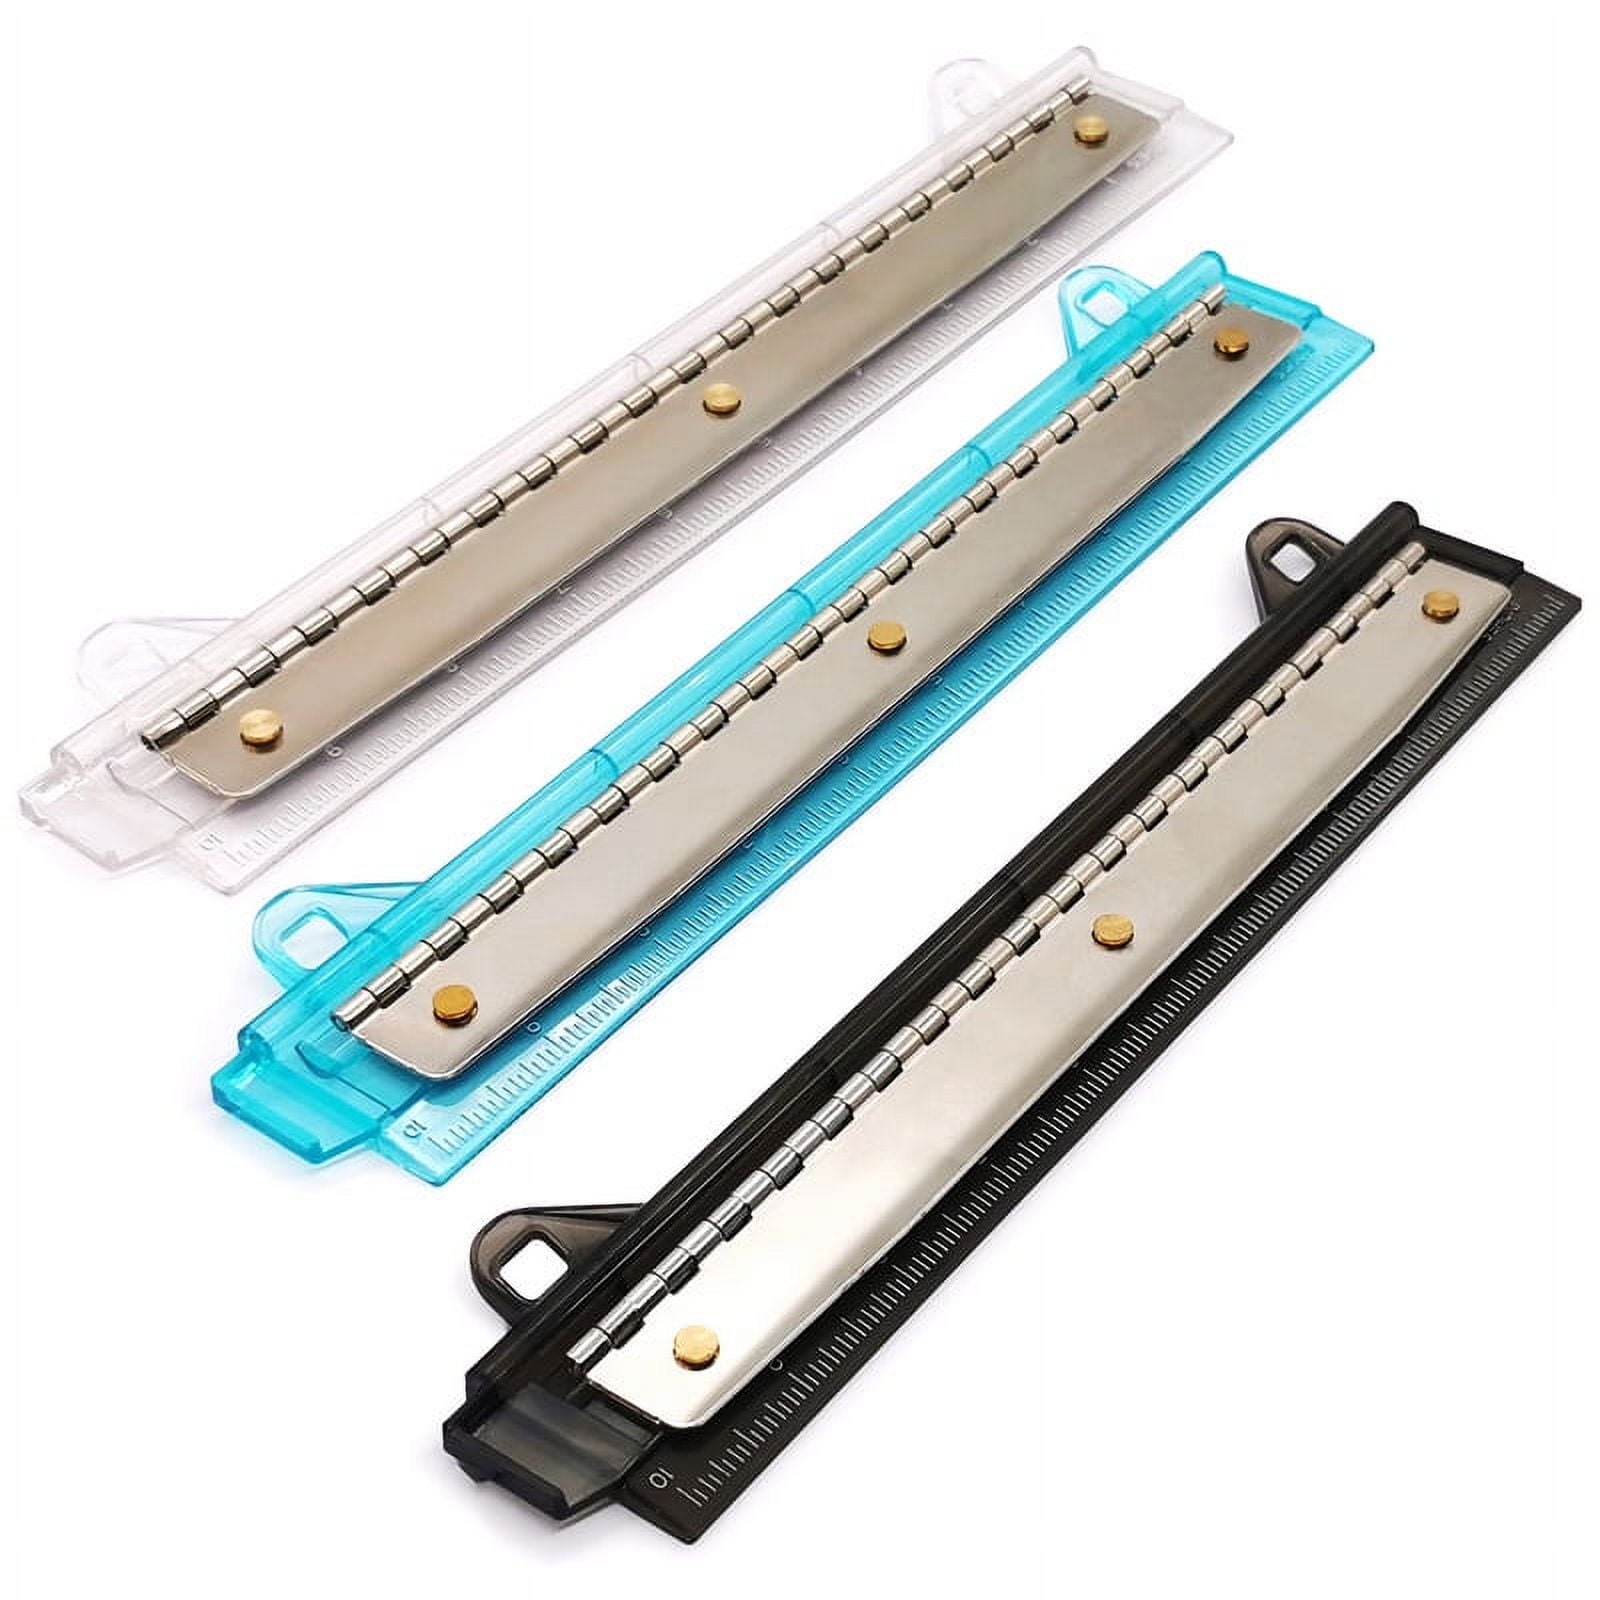 Emraw 3 Hole Puncher W/Punch Tray & Plastic Ruler Fits 3 Ring Binder(3Pk)